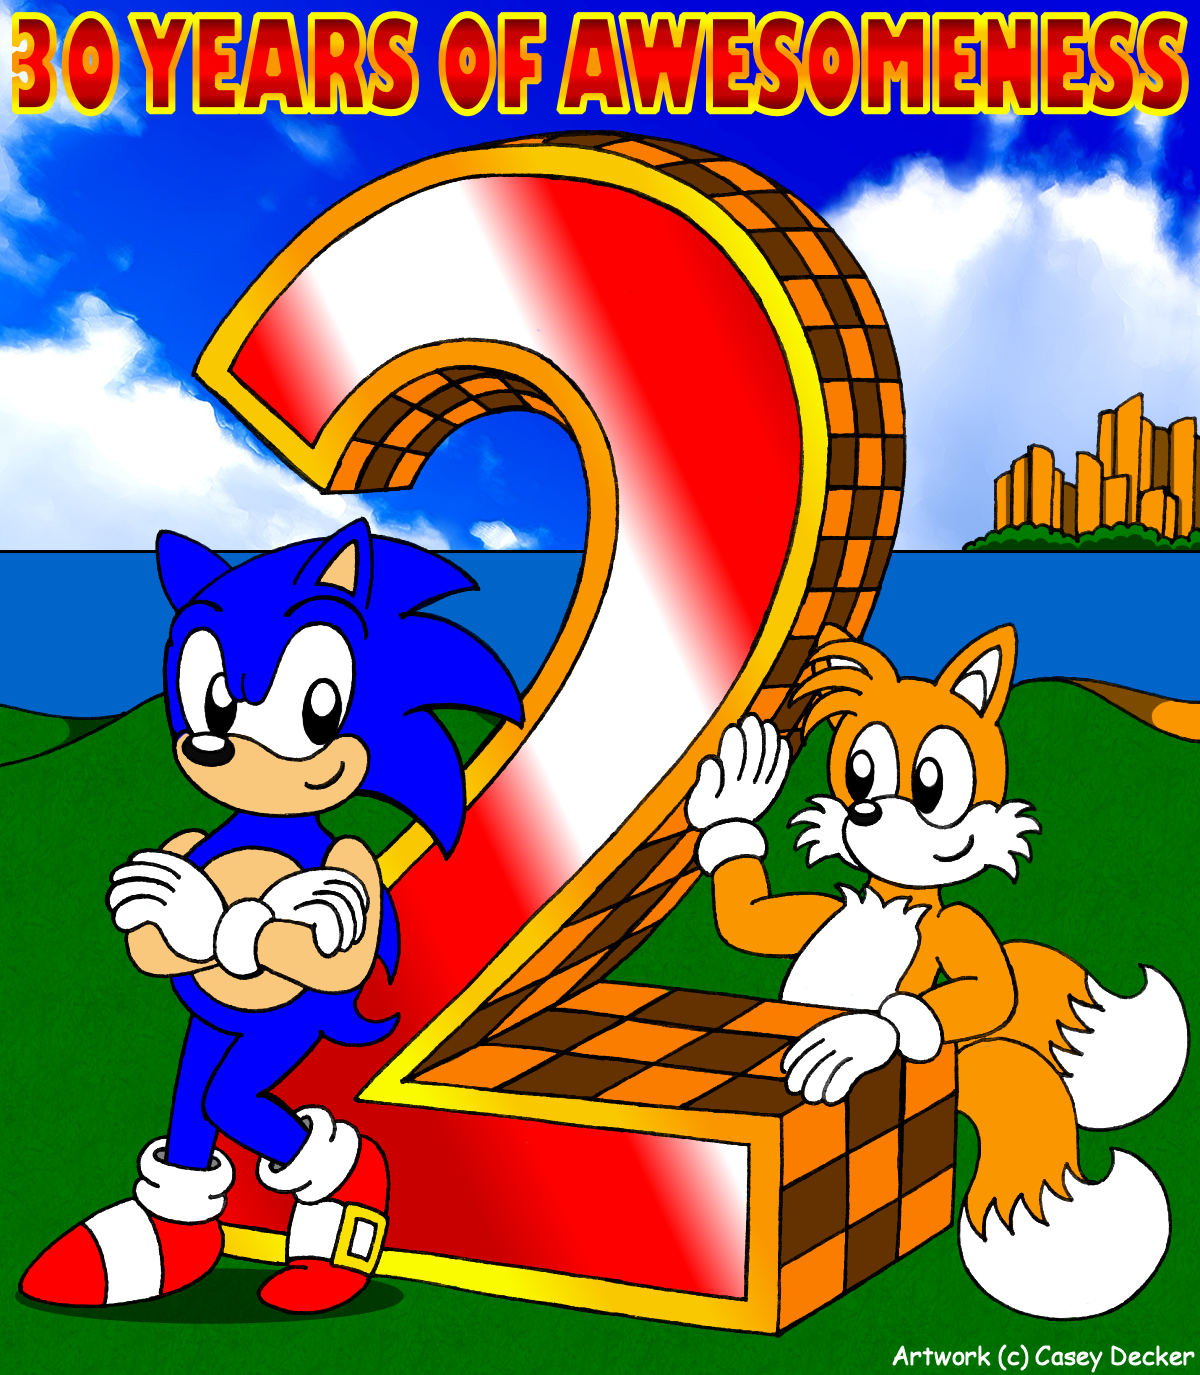 Sonic The Hedgehog 2 30th Logo by Bilico86 on DeviantArt